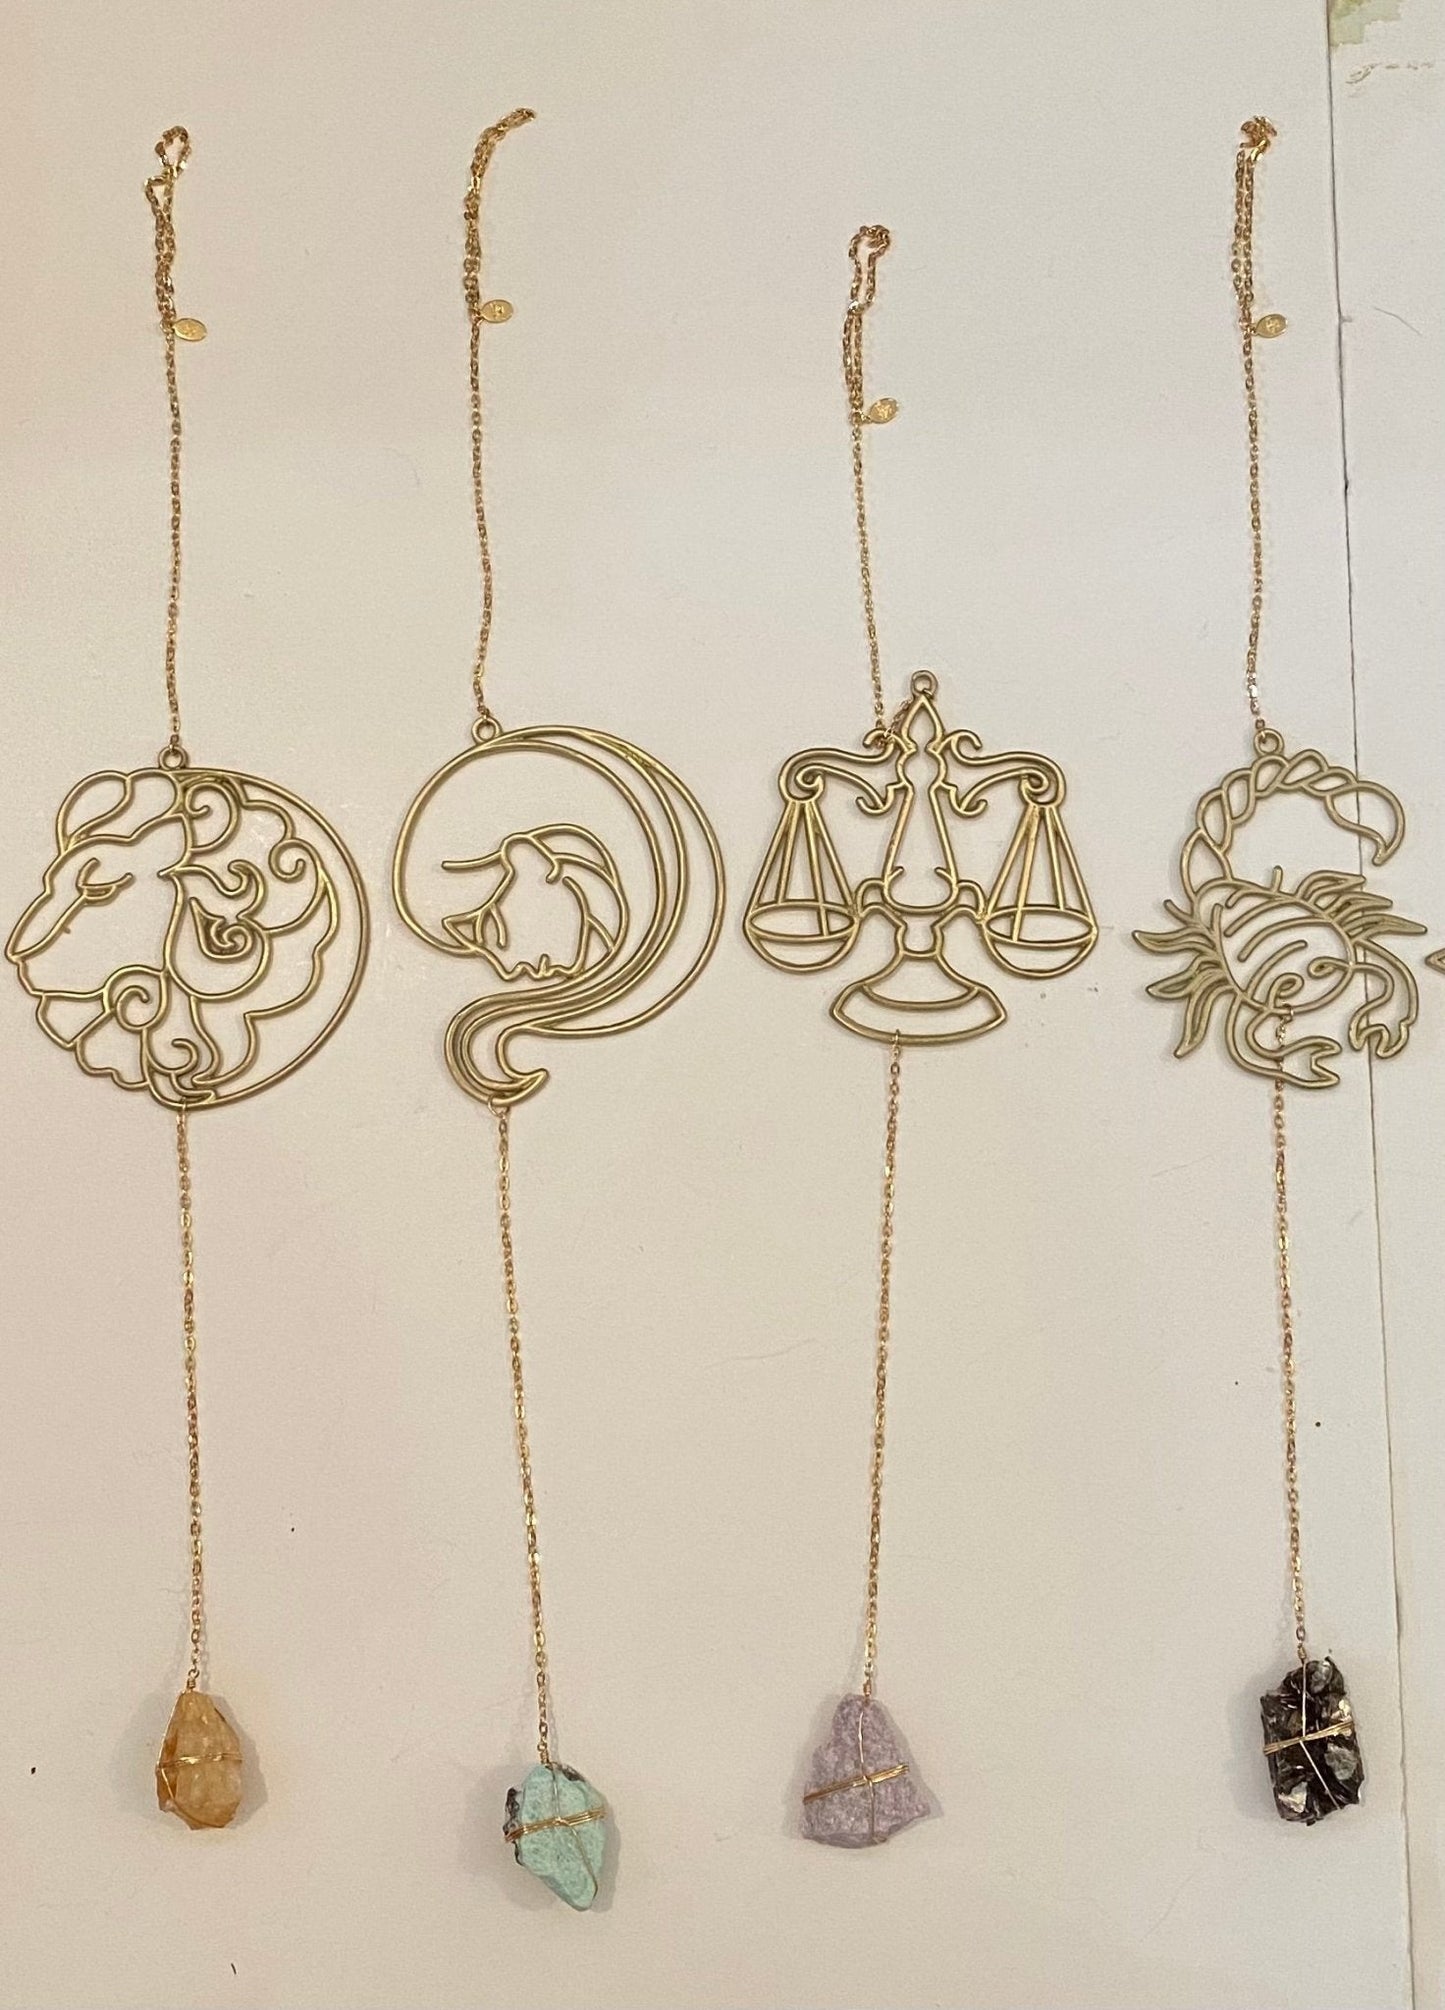 Zodiac Silhouette and Crystal Wall Hanging by Ariana Ost